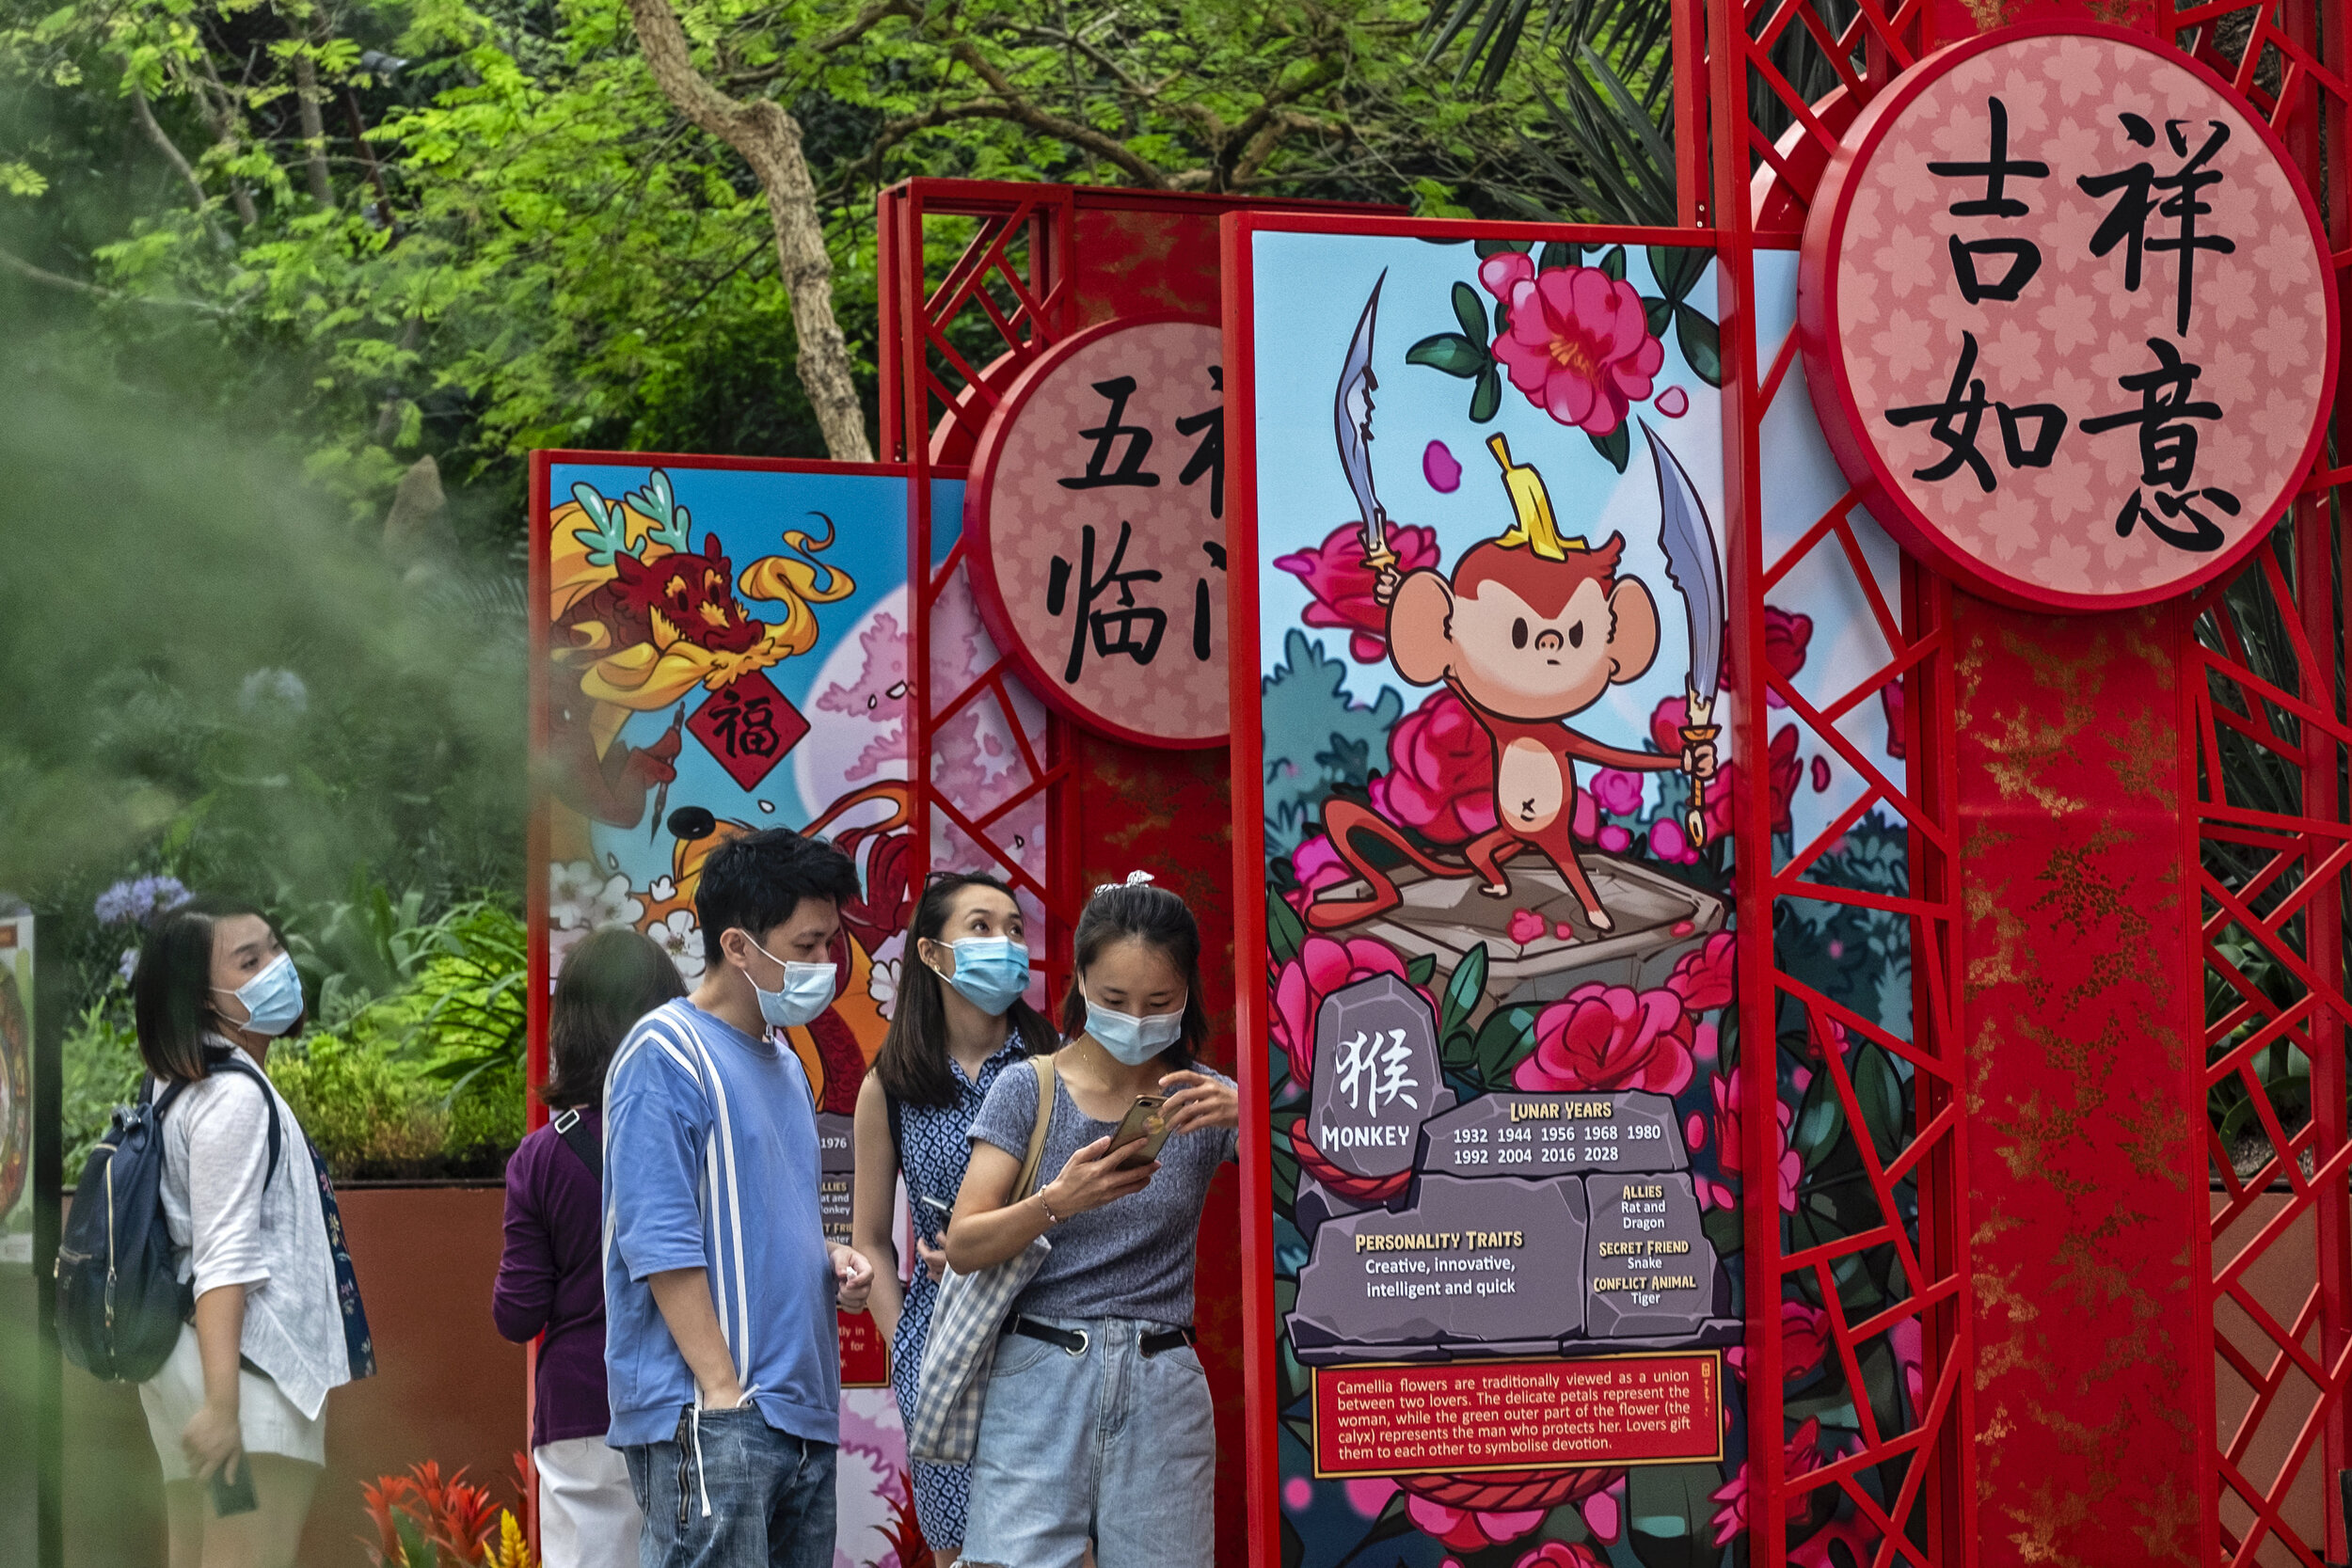  People check out information boards on Chinese zodiac animals during the annual Dahlia Dreams floral display ahead of the Chinese Lunar New Year of the Ox, otherwise known as the Spring Festival, at Singapore's Gardens by the Bay, January 31, 2021. 